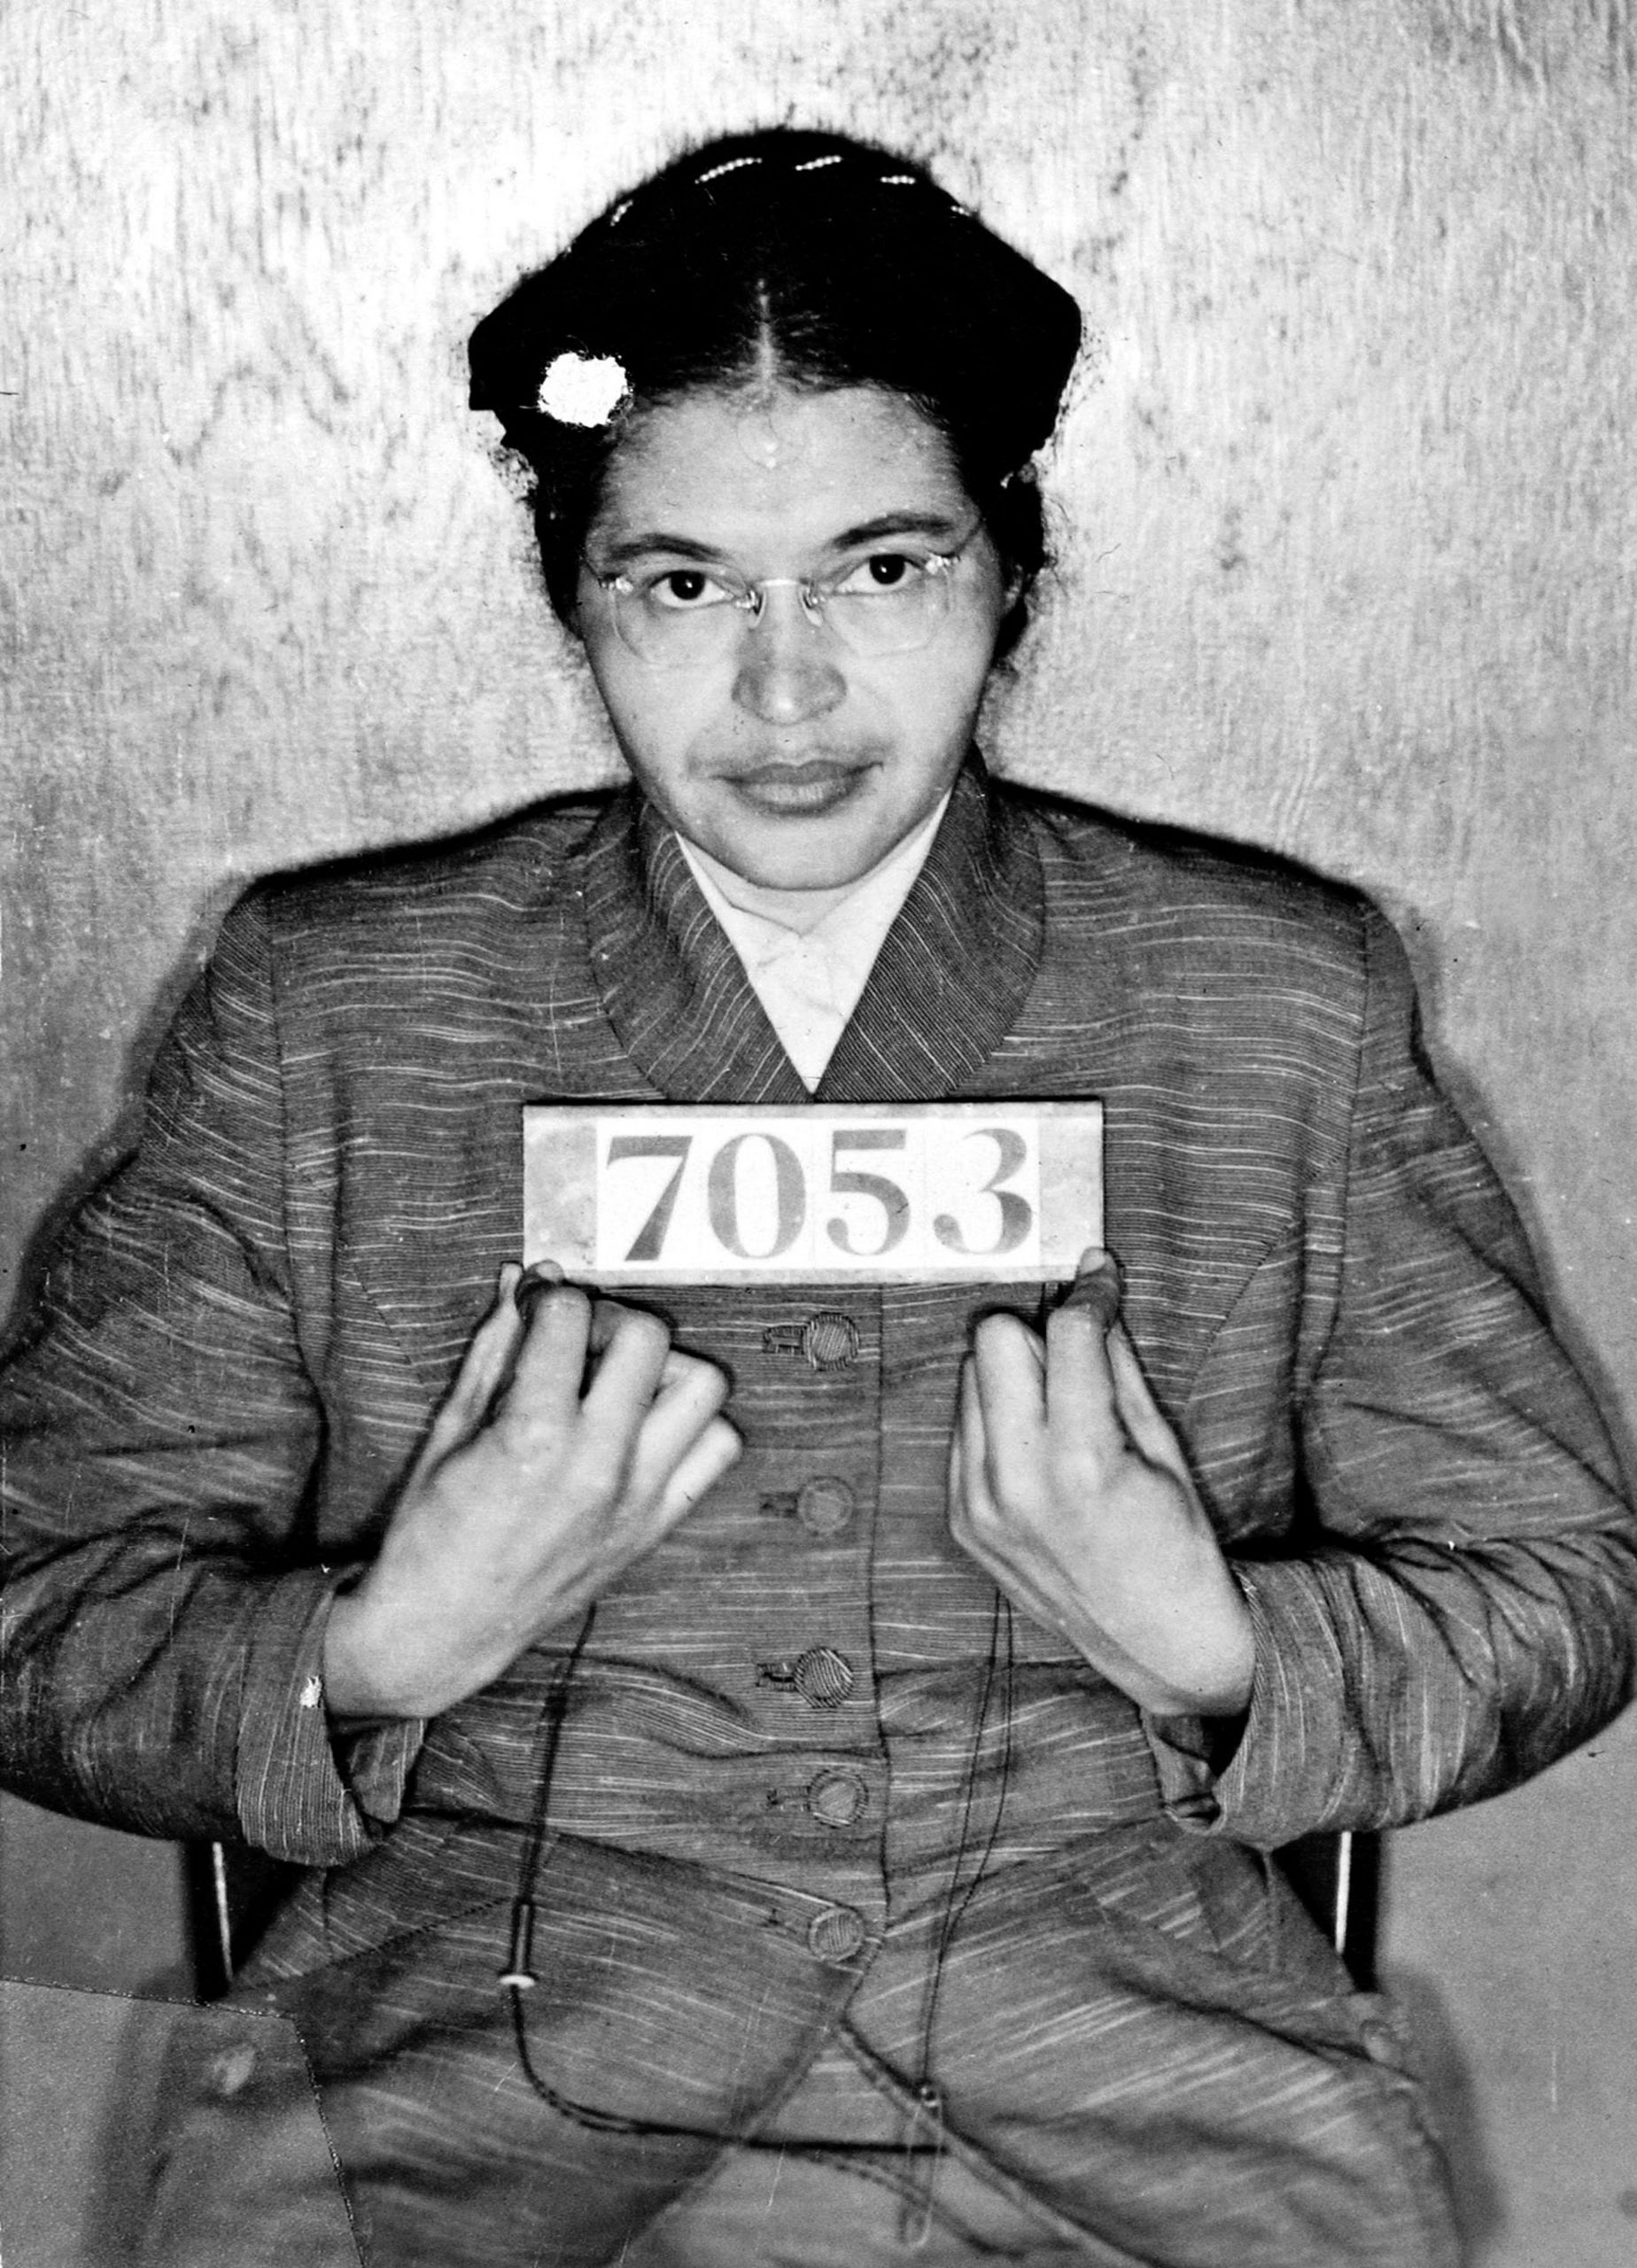 Mandatory Credit: Photo by Universal History Archive/UIG/Shutterstock (2541859a) Rosa Louise McCauley Parks (1913-2005), American Civil Rights activist. Booking photo taken at the time of her arrest for refusing to give up her seat on a Montgomery, Alabama, bus to a white passenger on 1 December 1955. History